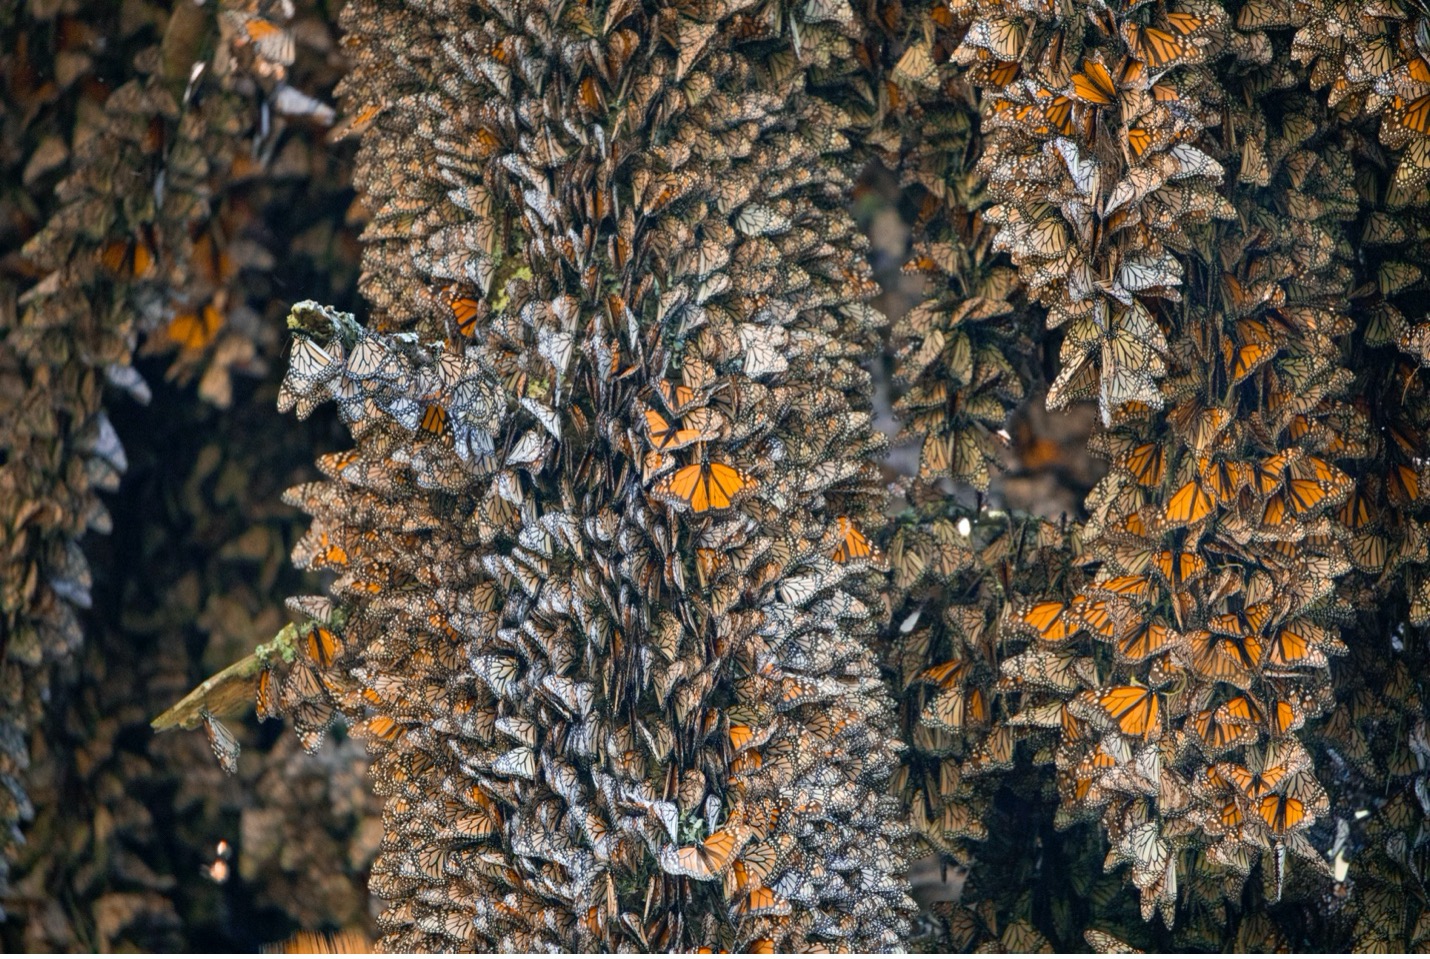 monarch butterflies fill the frame of the photo from edge to edge